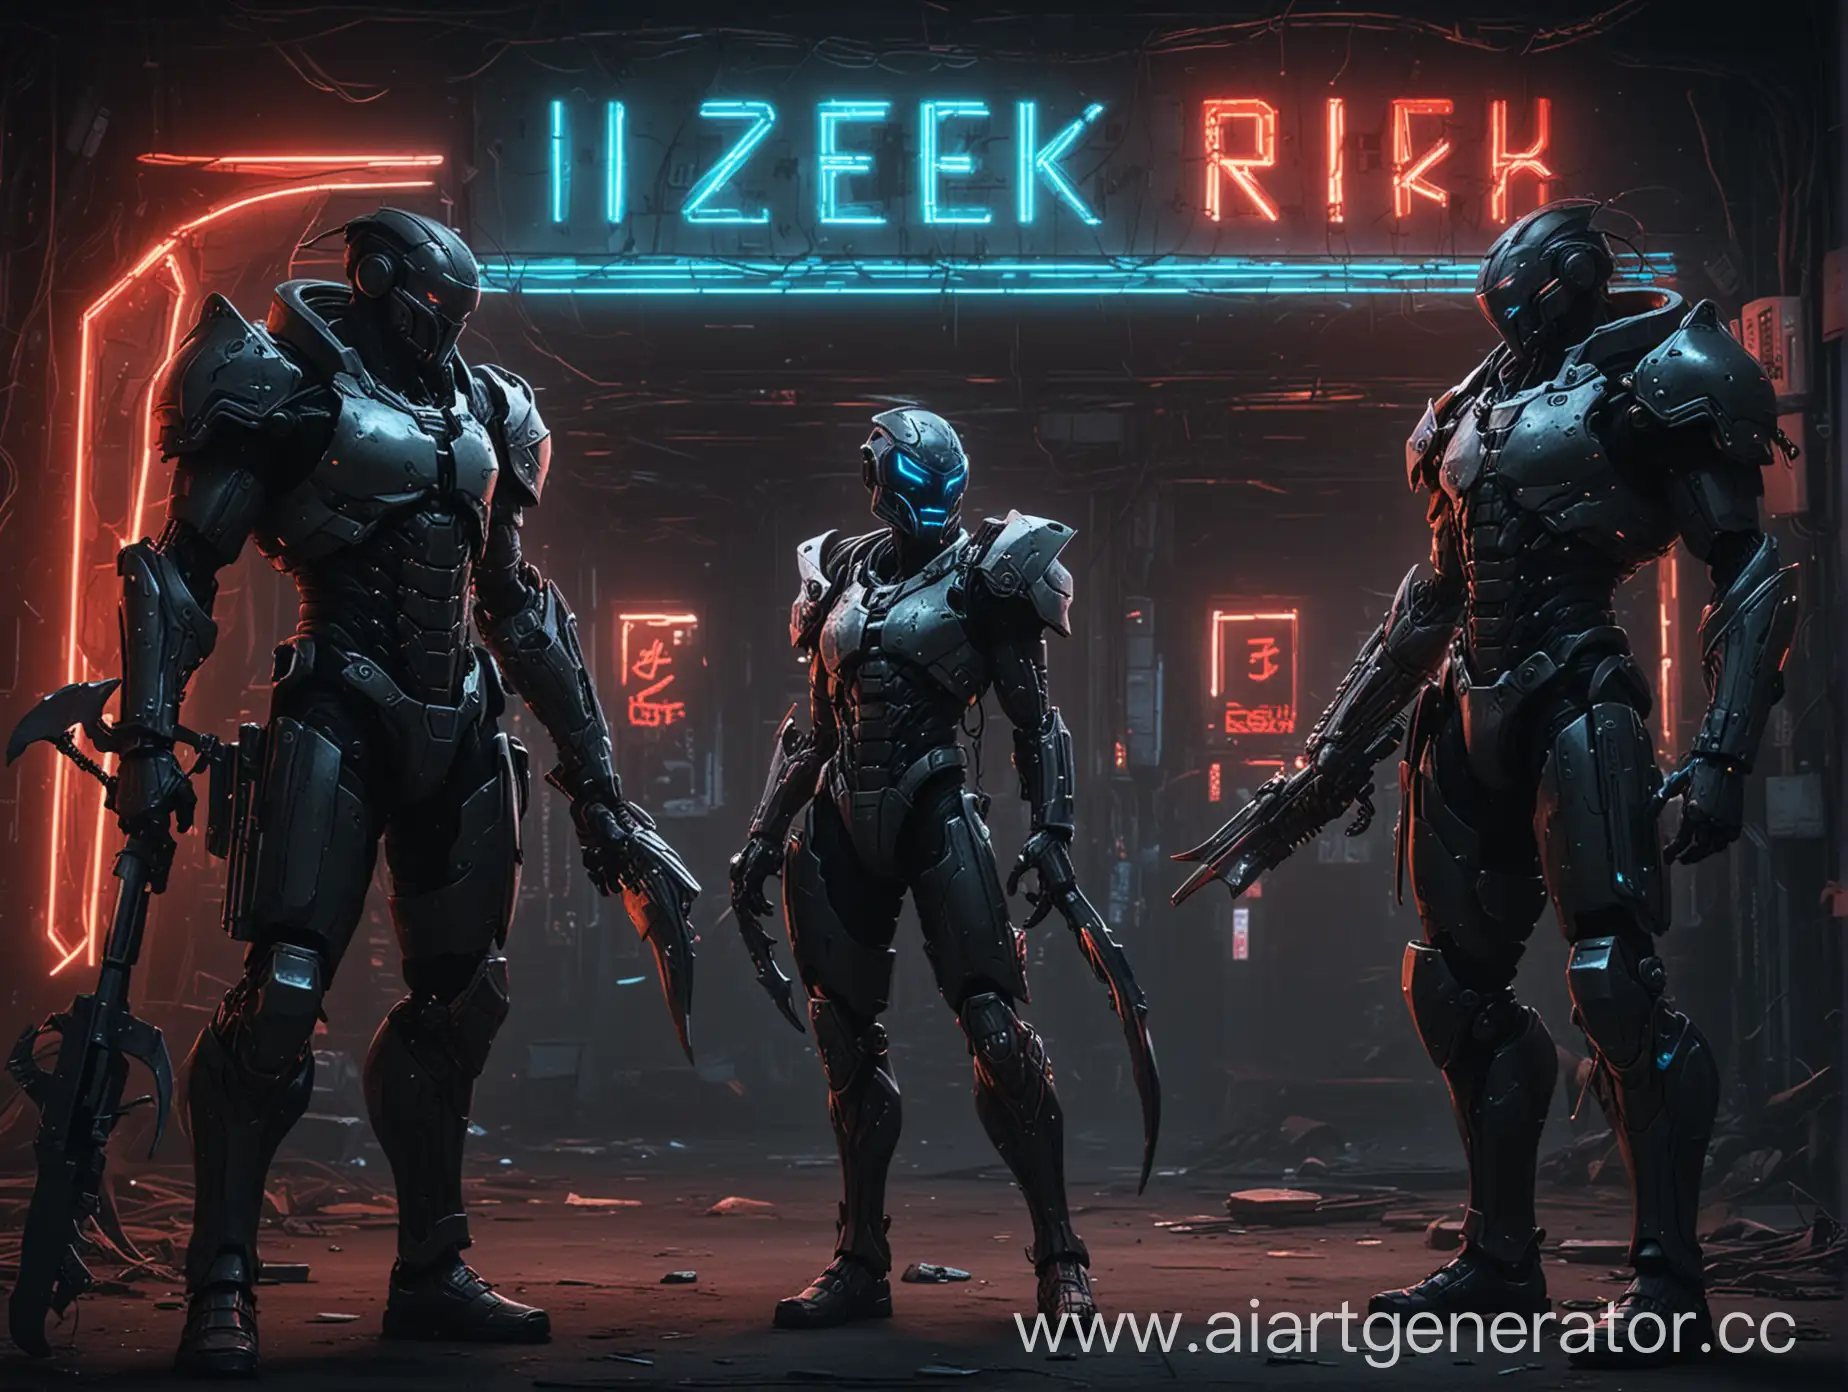 Neon-Cyber-Soldiers-with-Scythes-Confrontation-at-Izek